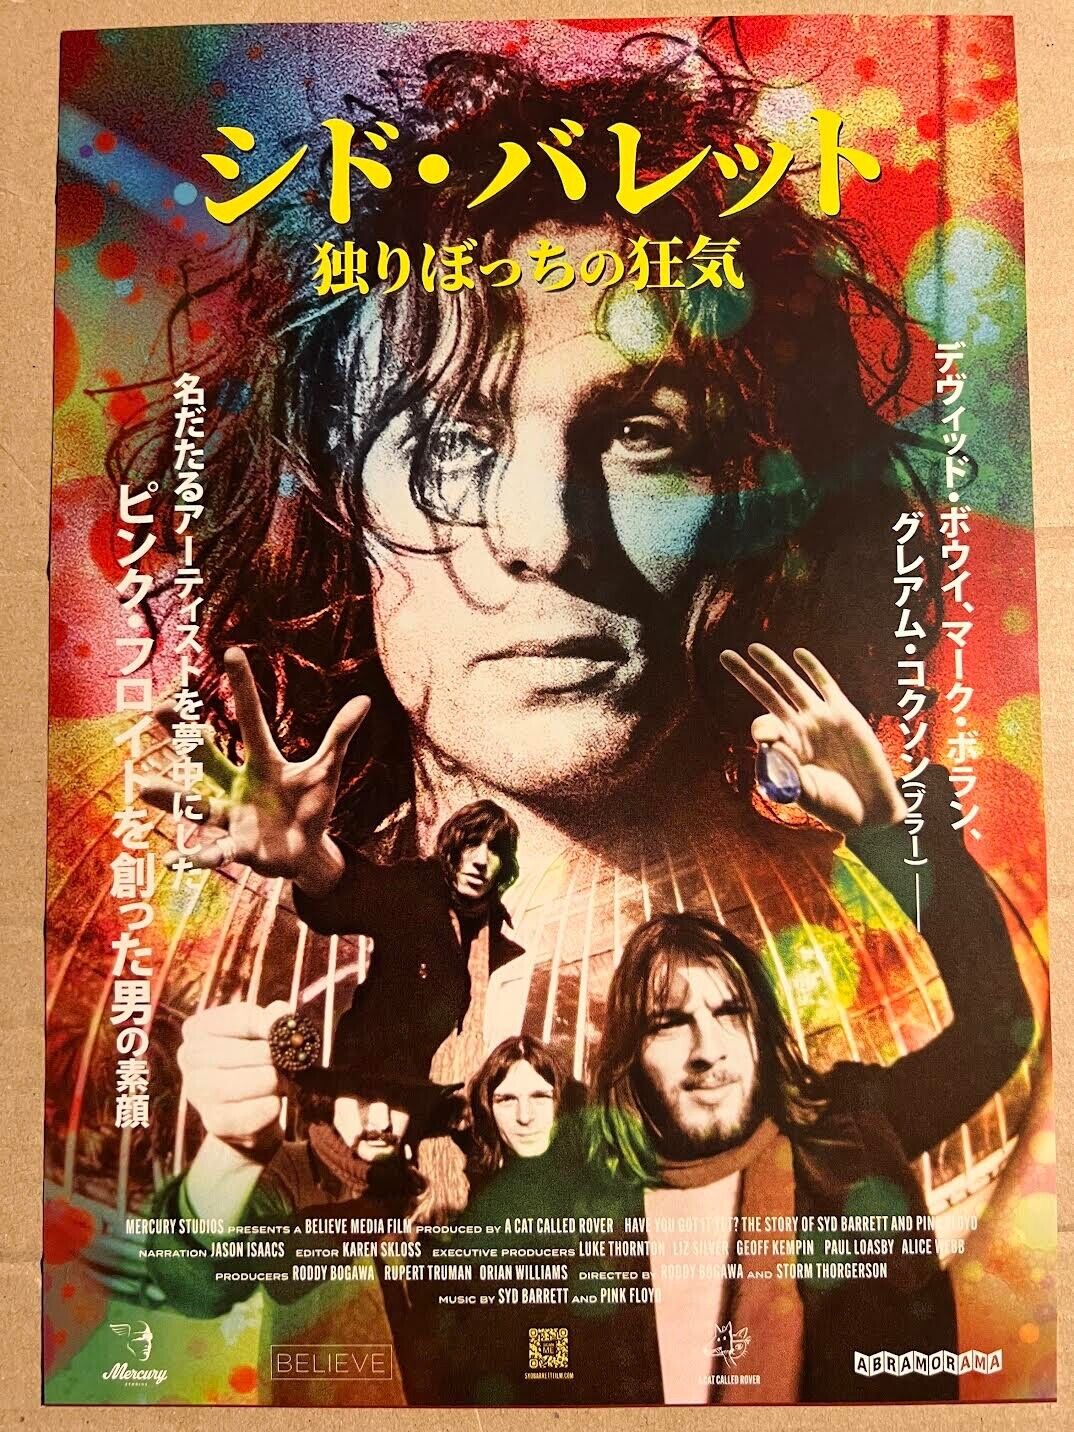 Have You Got It Yet? The Story of Syd Barrett and Pink Floyd-Movie Poster-Japan